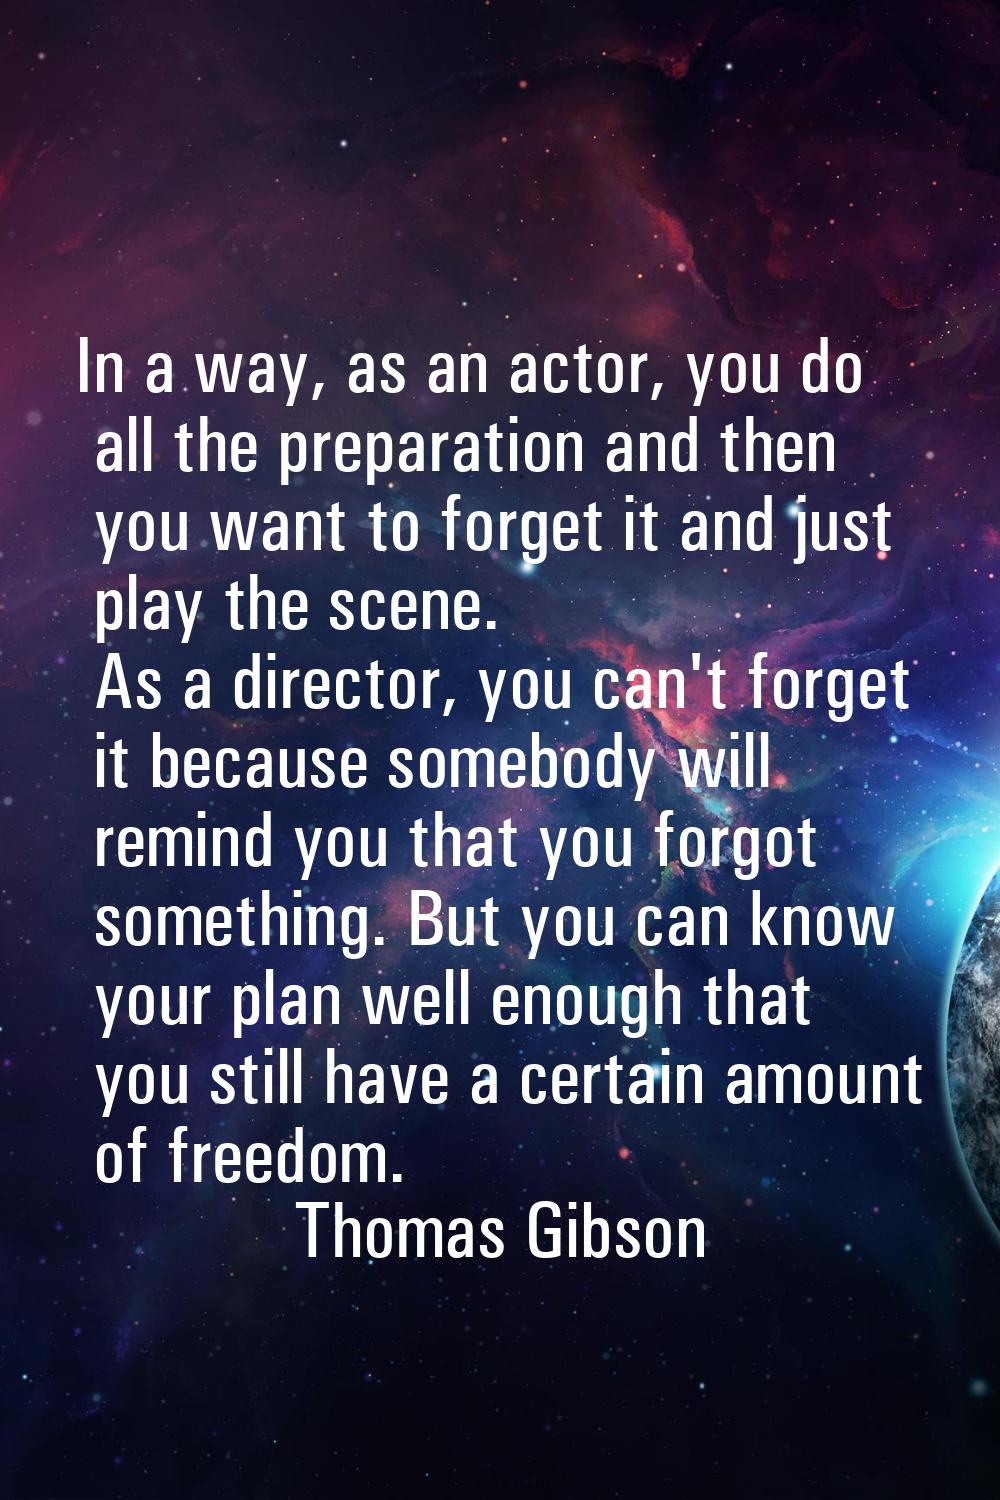 In a way, as an actor, you do all the preparation and then you want to forget it and just play the 